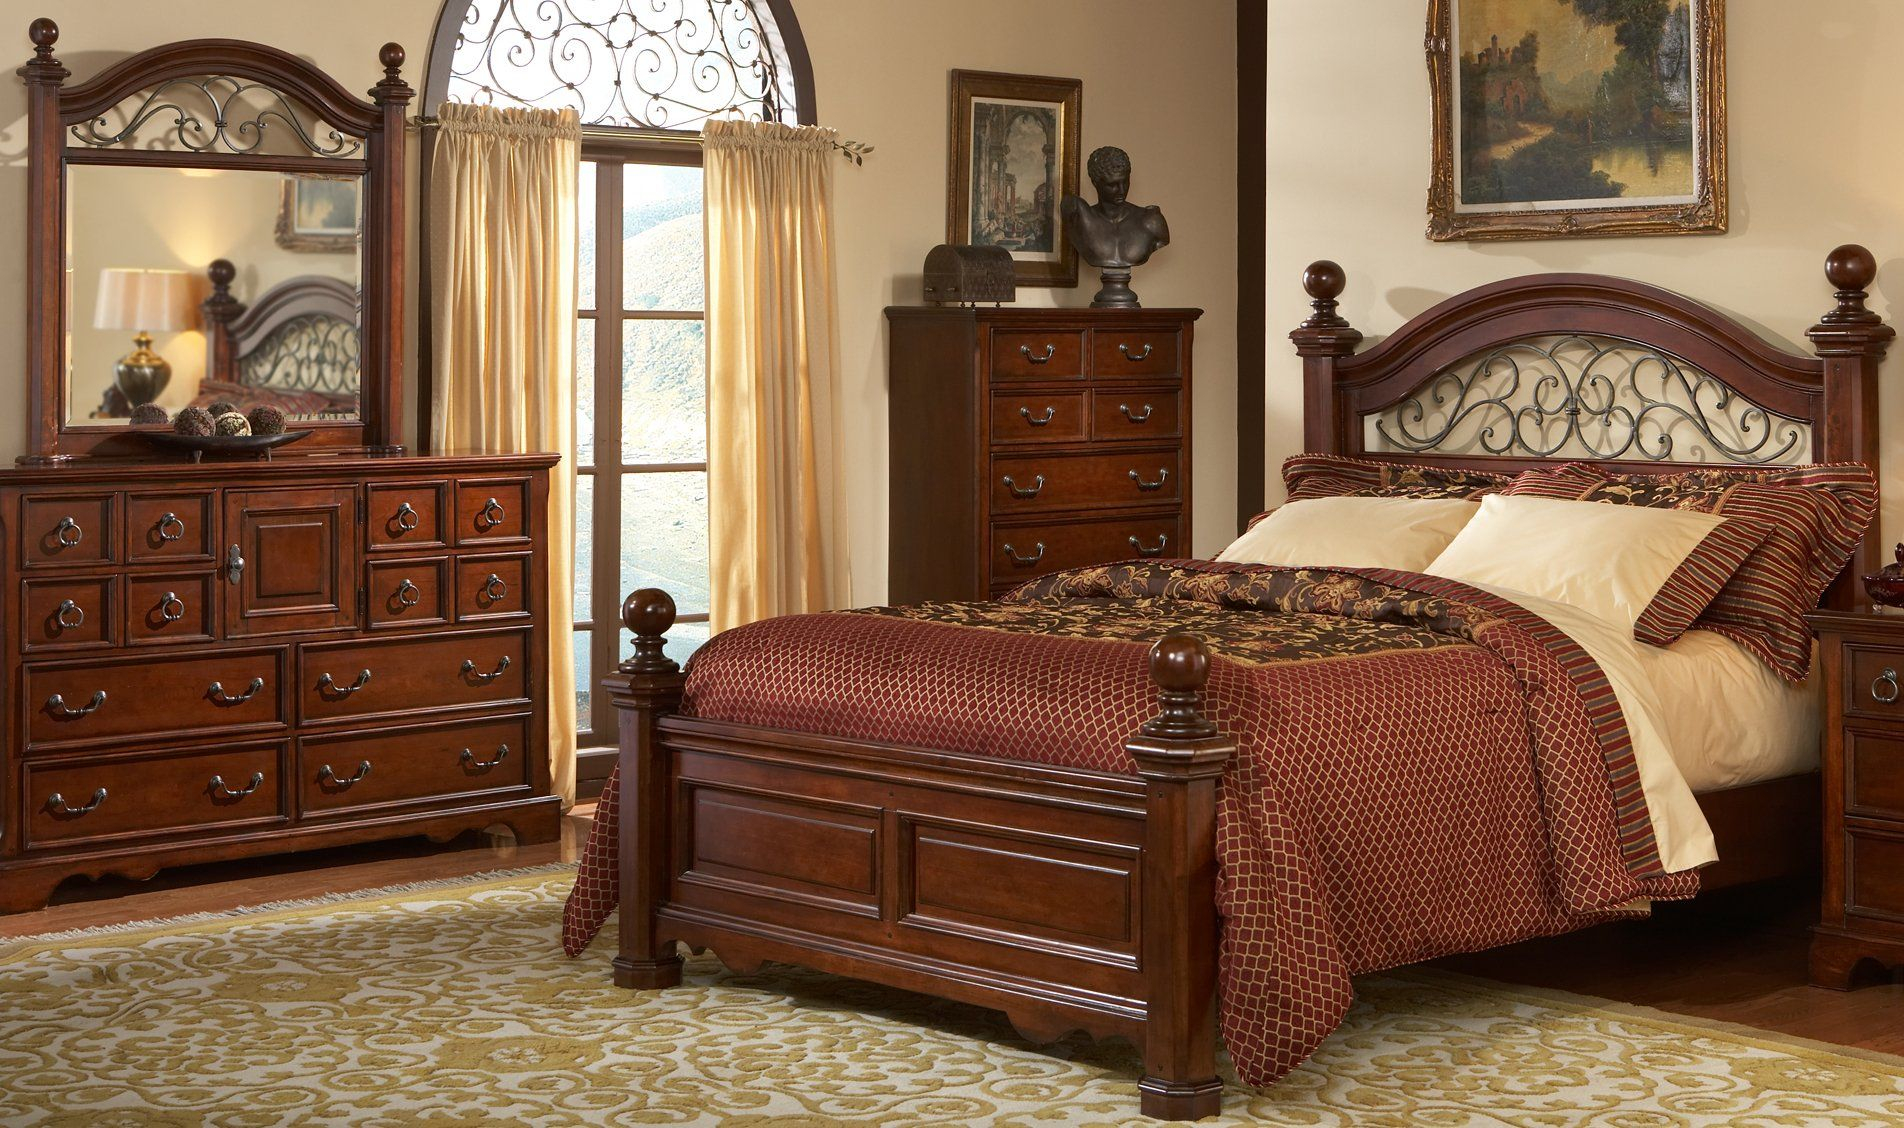 iron wrought bedroom furniture